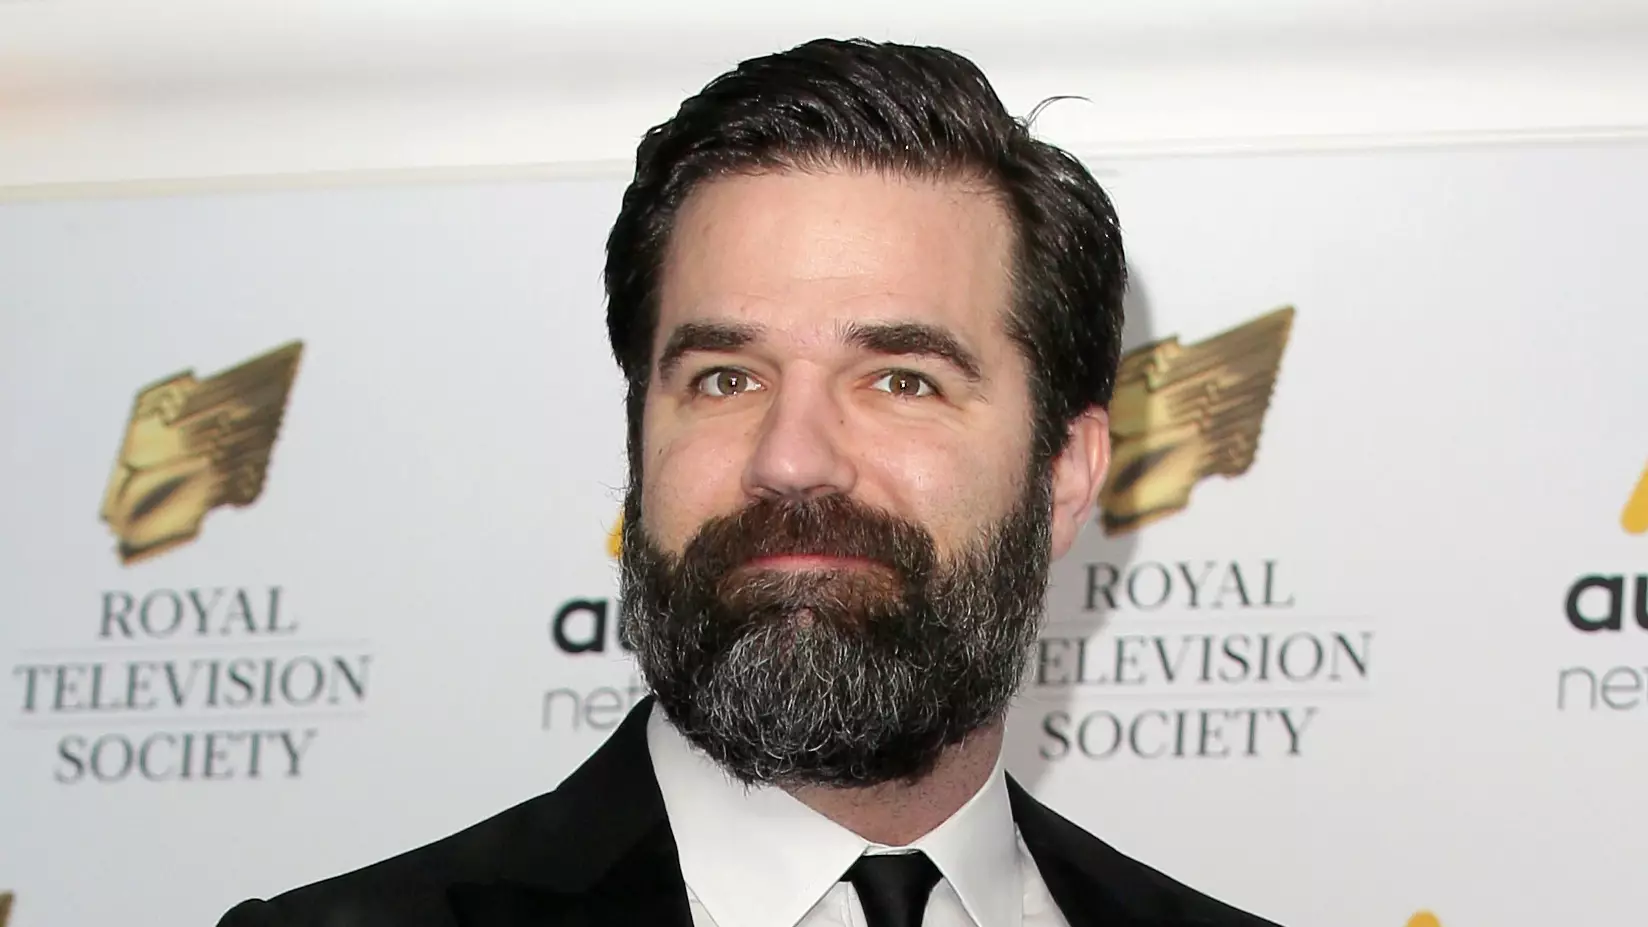 Actor And Comedian Rob Delaney Shares Heart-Breaking News His Son Has Died 